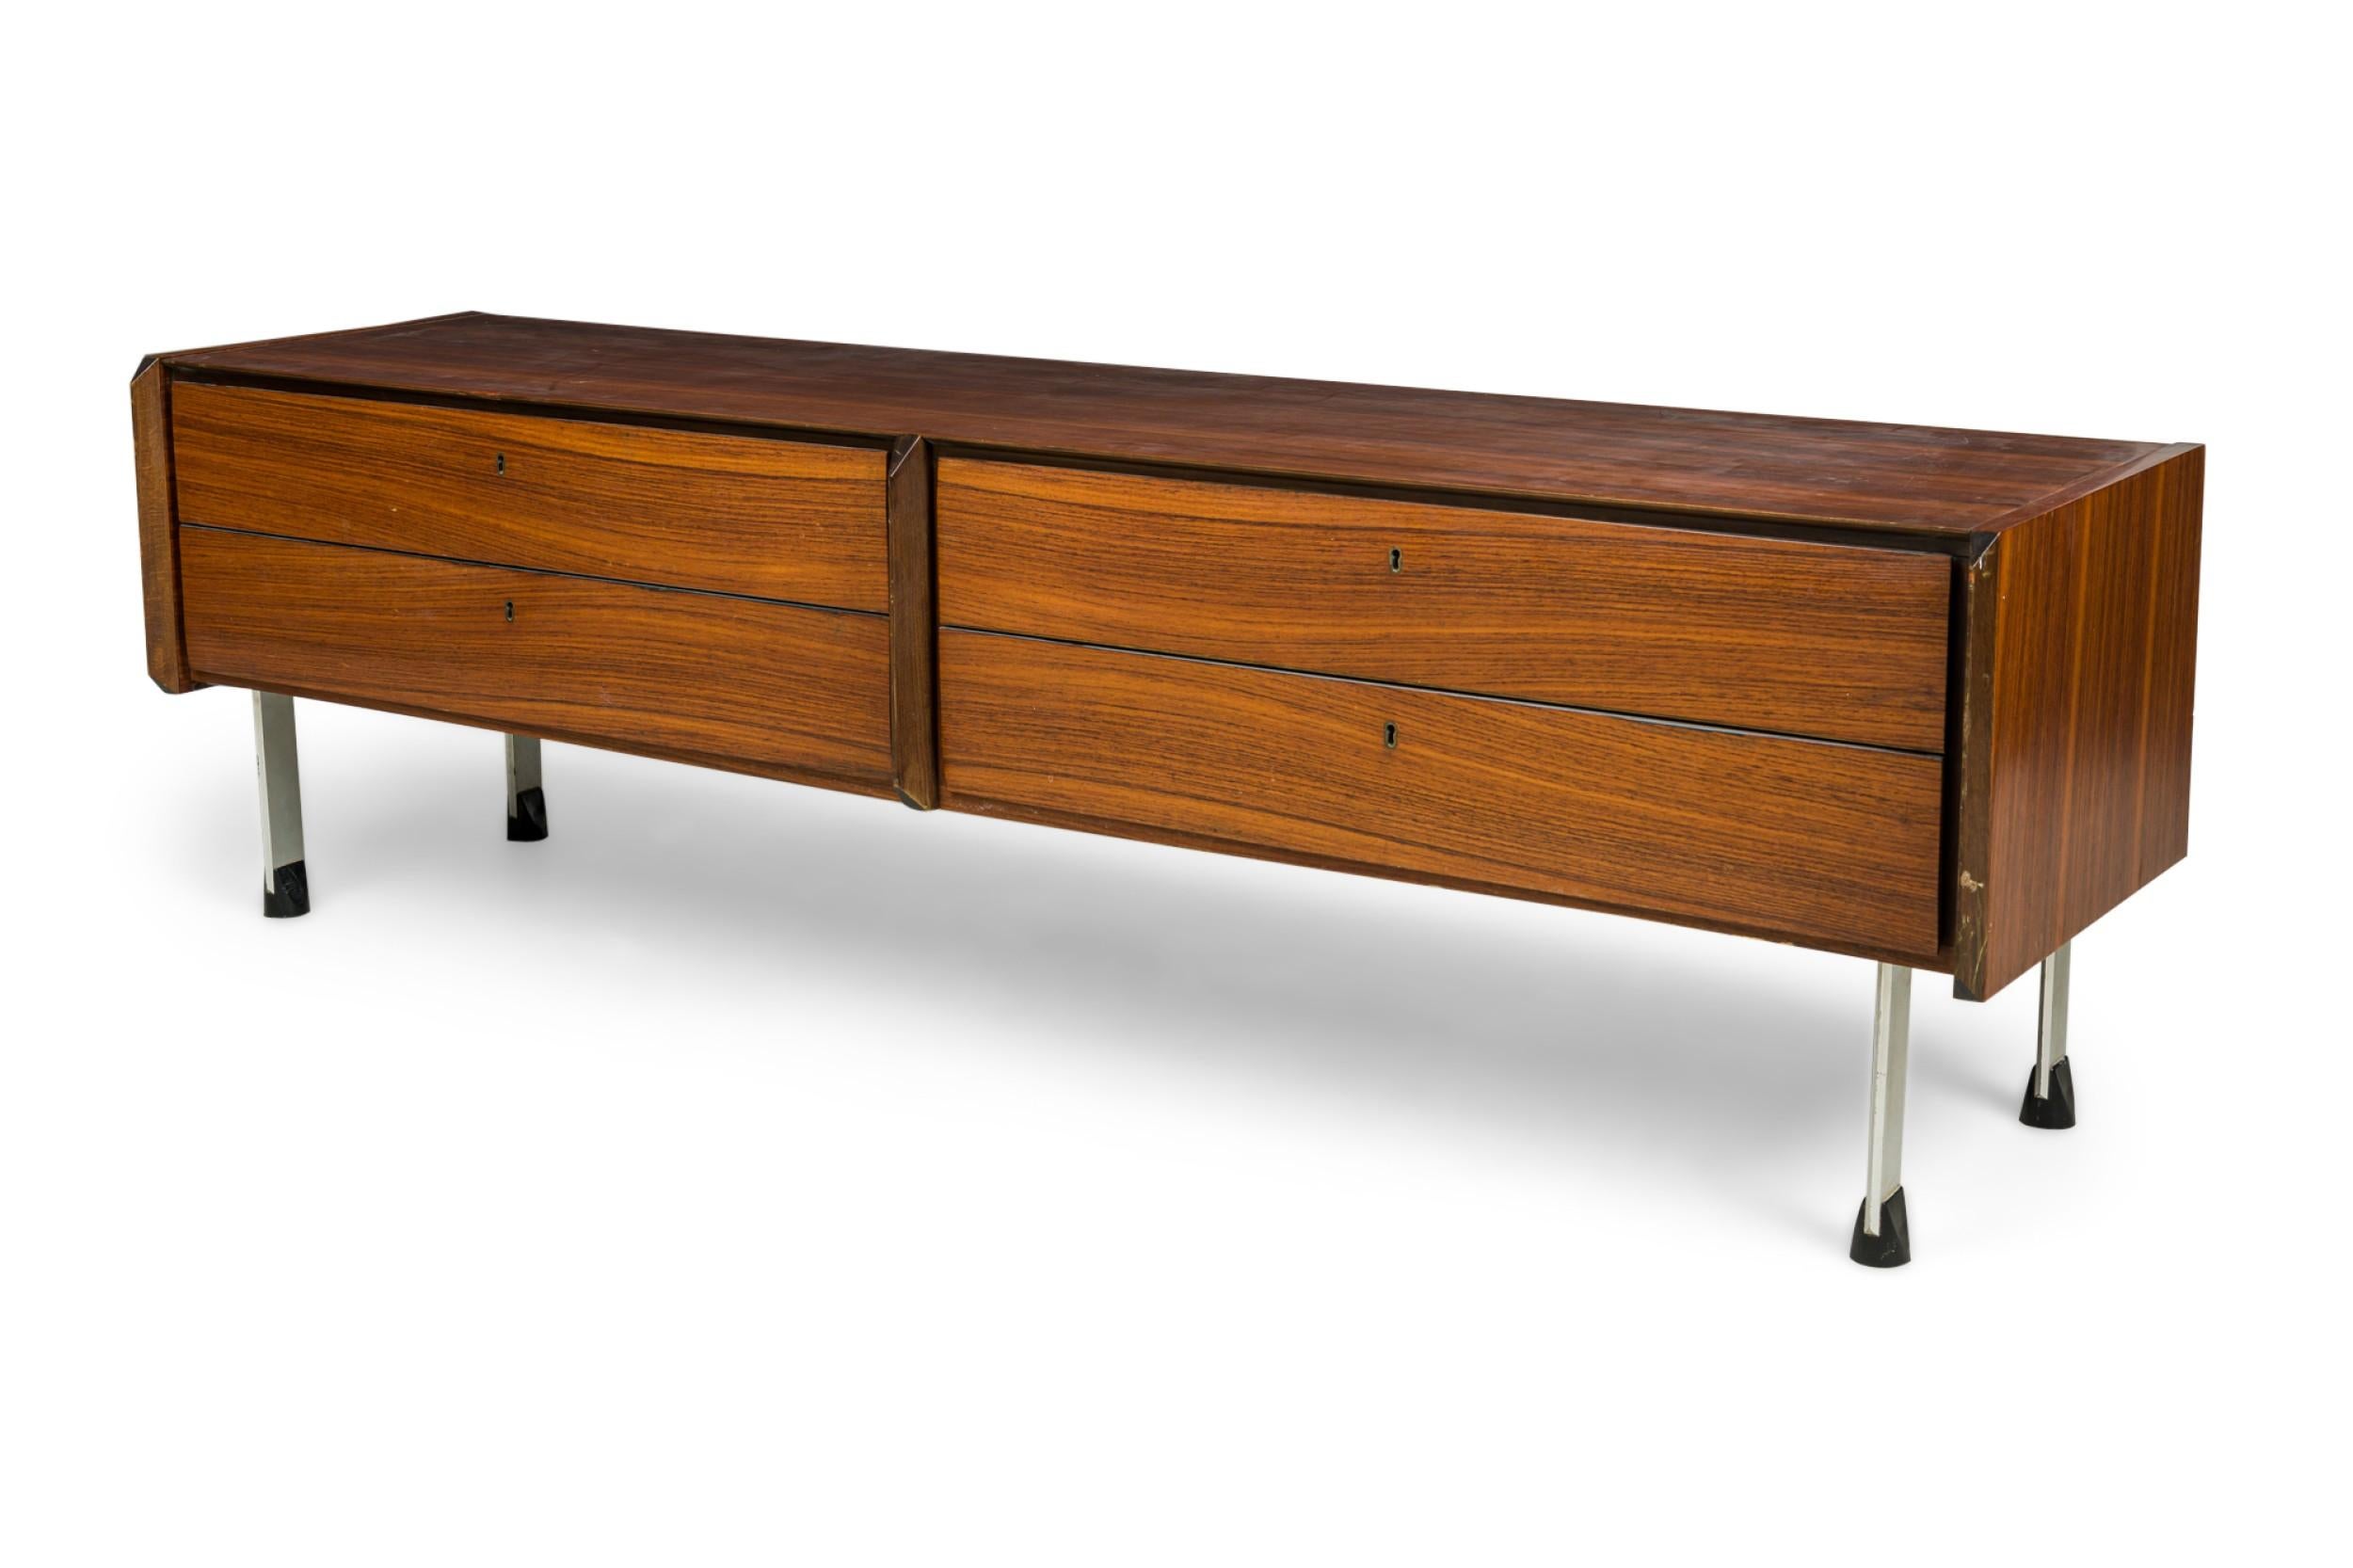 Swedish Mid-Century rosewood low buffet / sideboard with 2 pair of drawers and narrow chrom metal legs ending in a black form sabot
